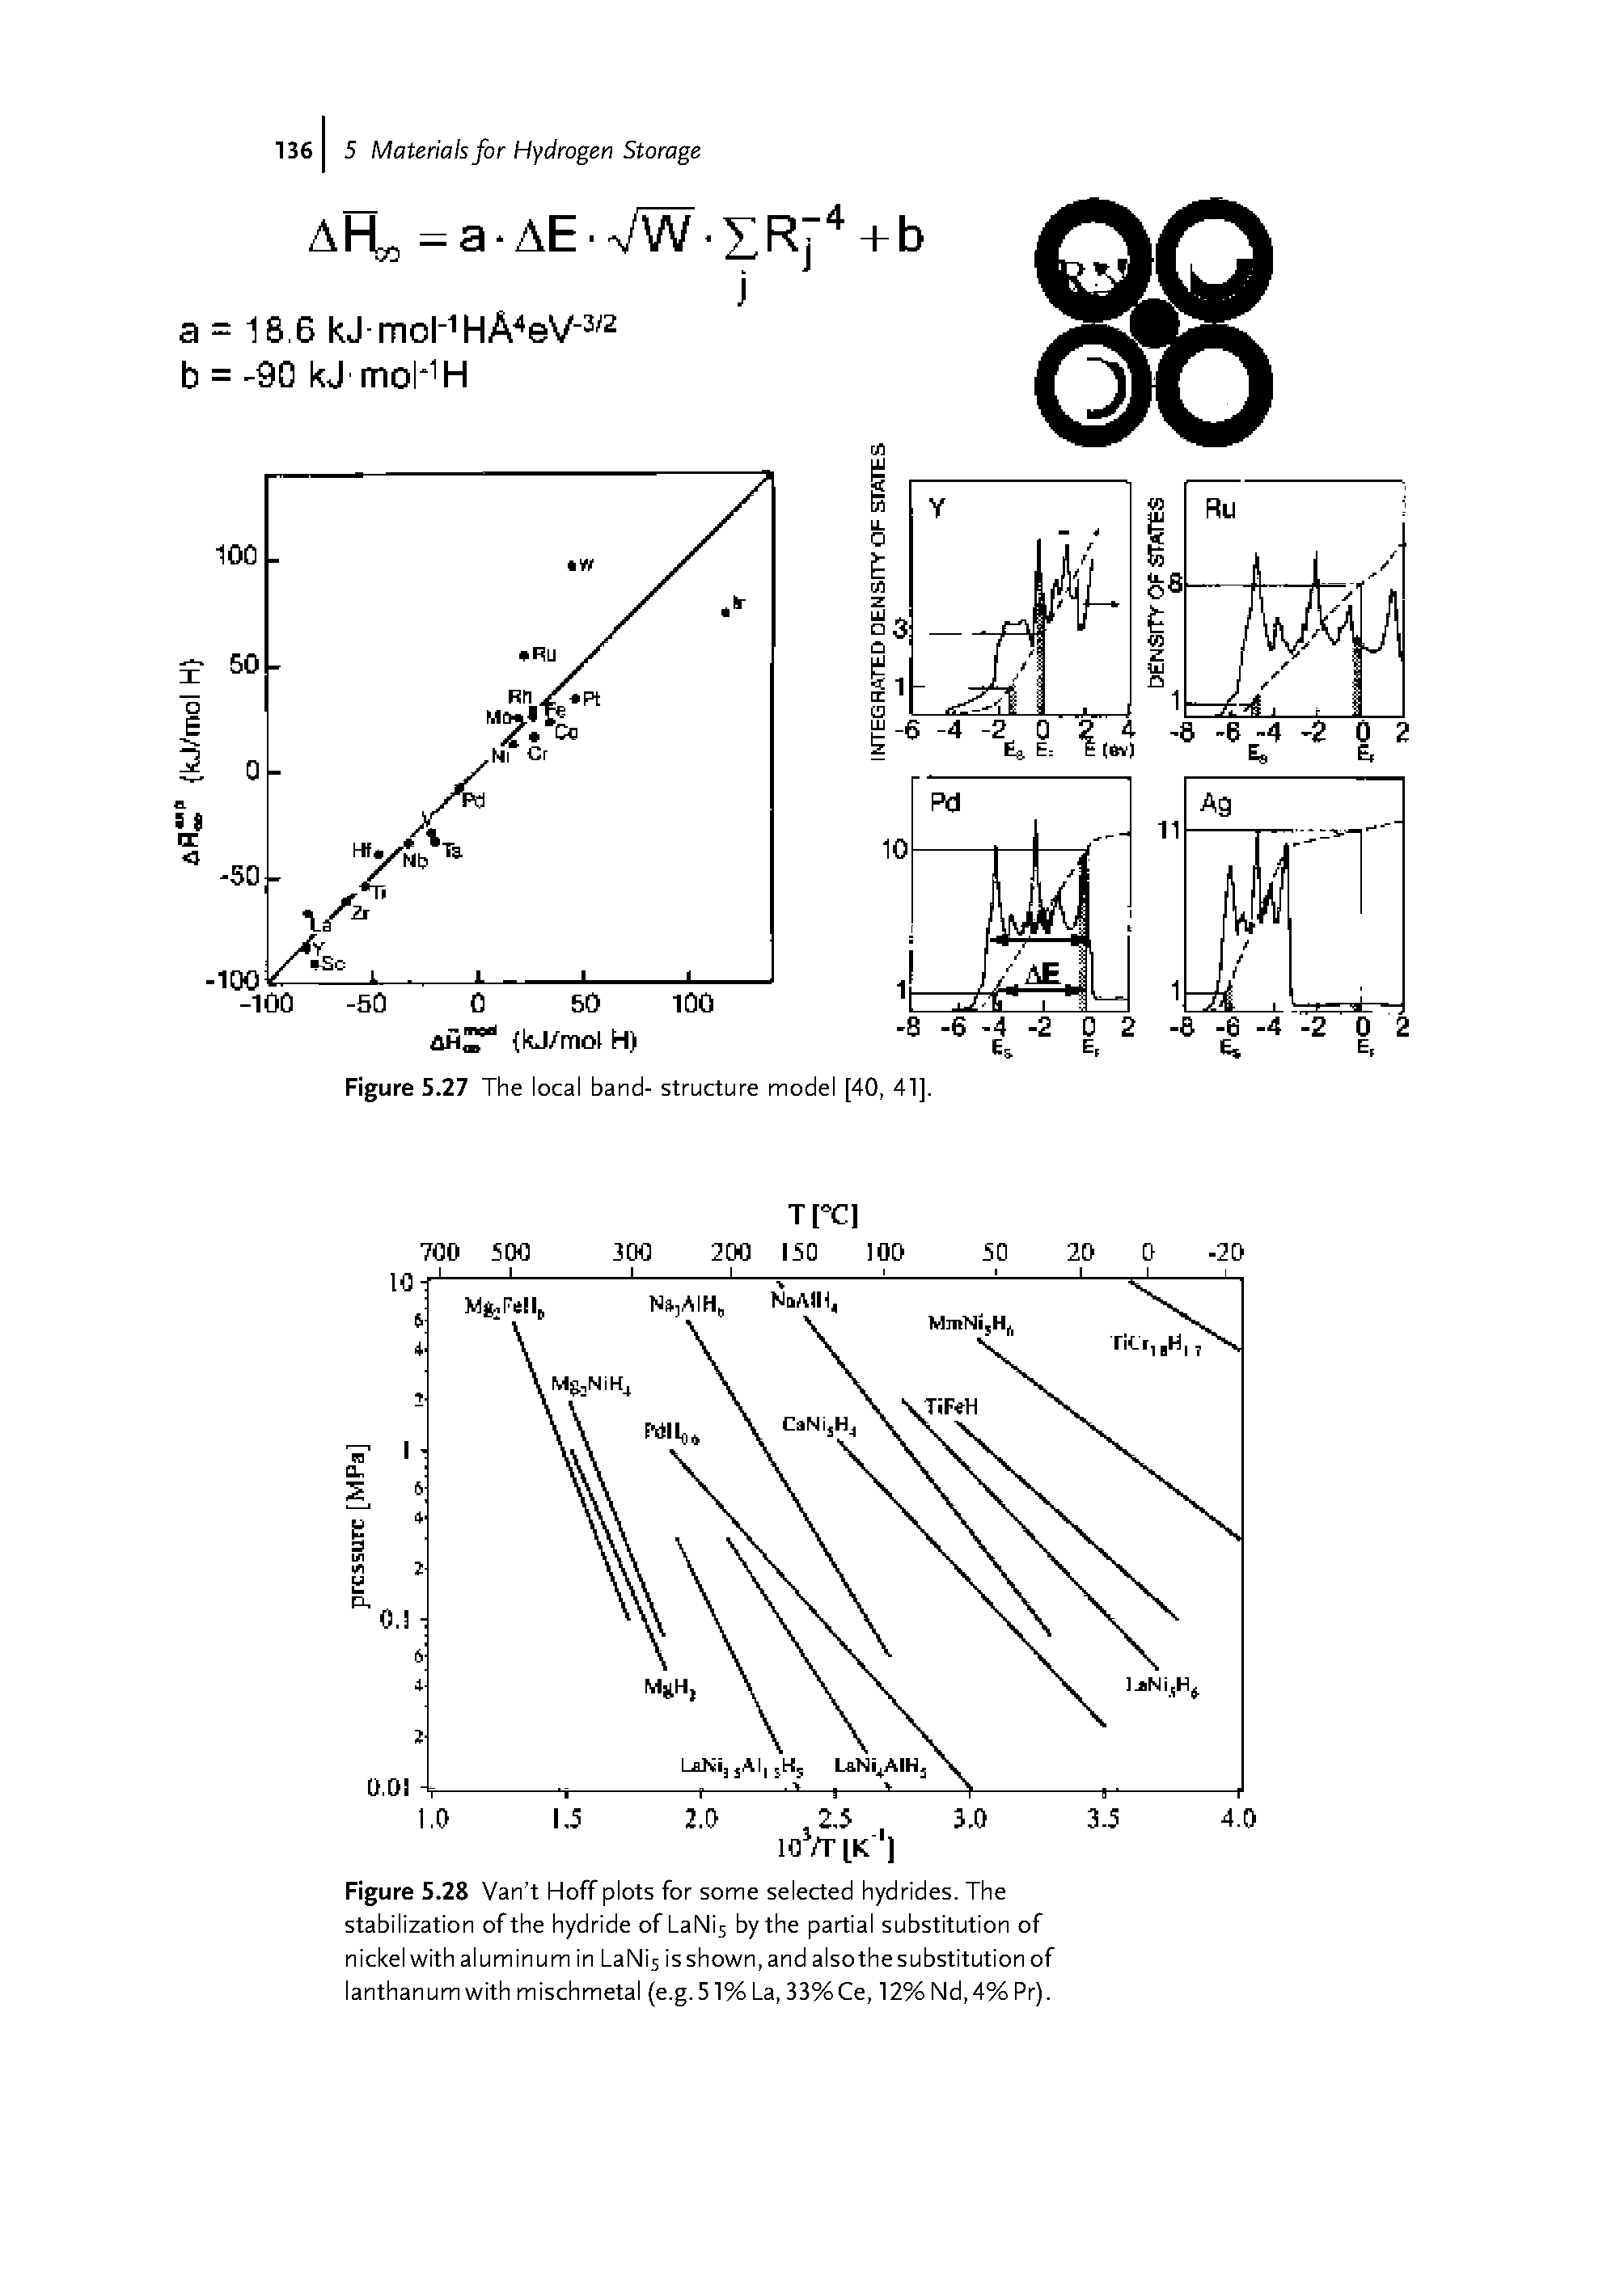 Figure 5.28 Van t Hoff plots for some selected hydrides. The stabilization of the hydride of LaNis by the partial substitution of nickel with aluminum in LaNis is shown, and also the substitution of lanthanum with mischmetal (e.g. 51% La, 33% Ce, 12% Nd,4% Pr).